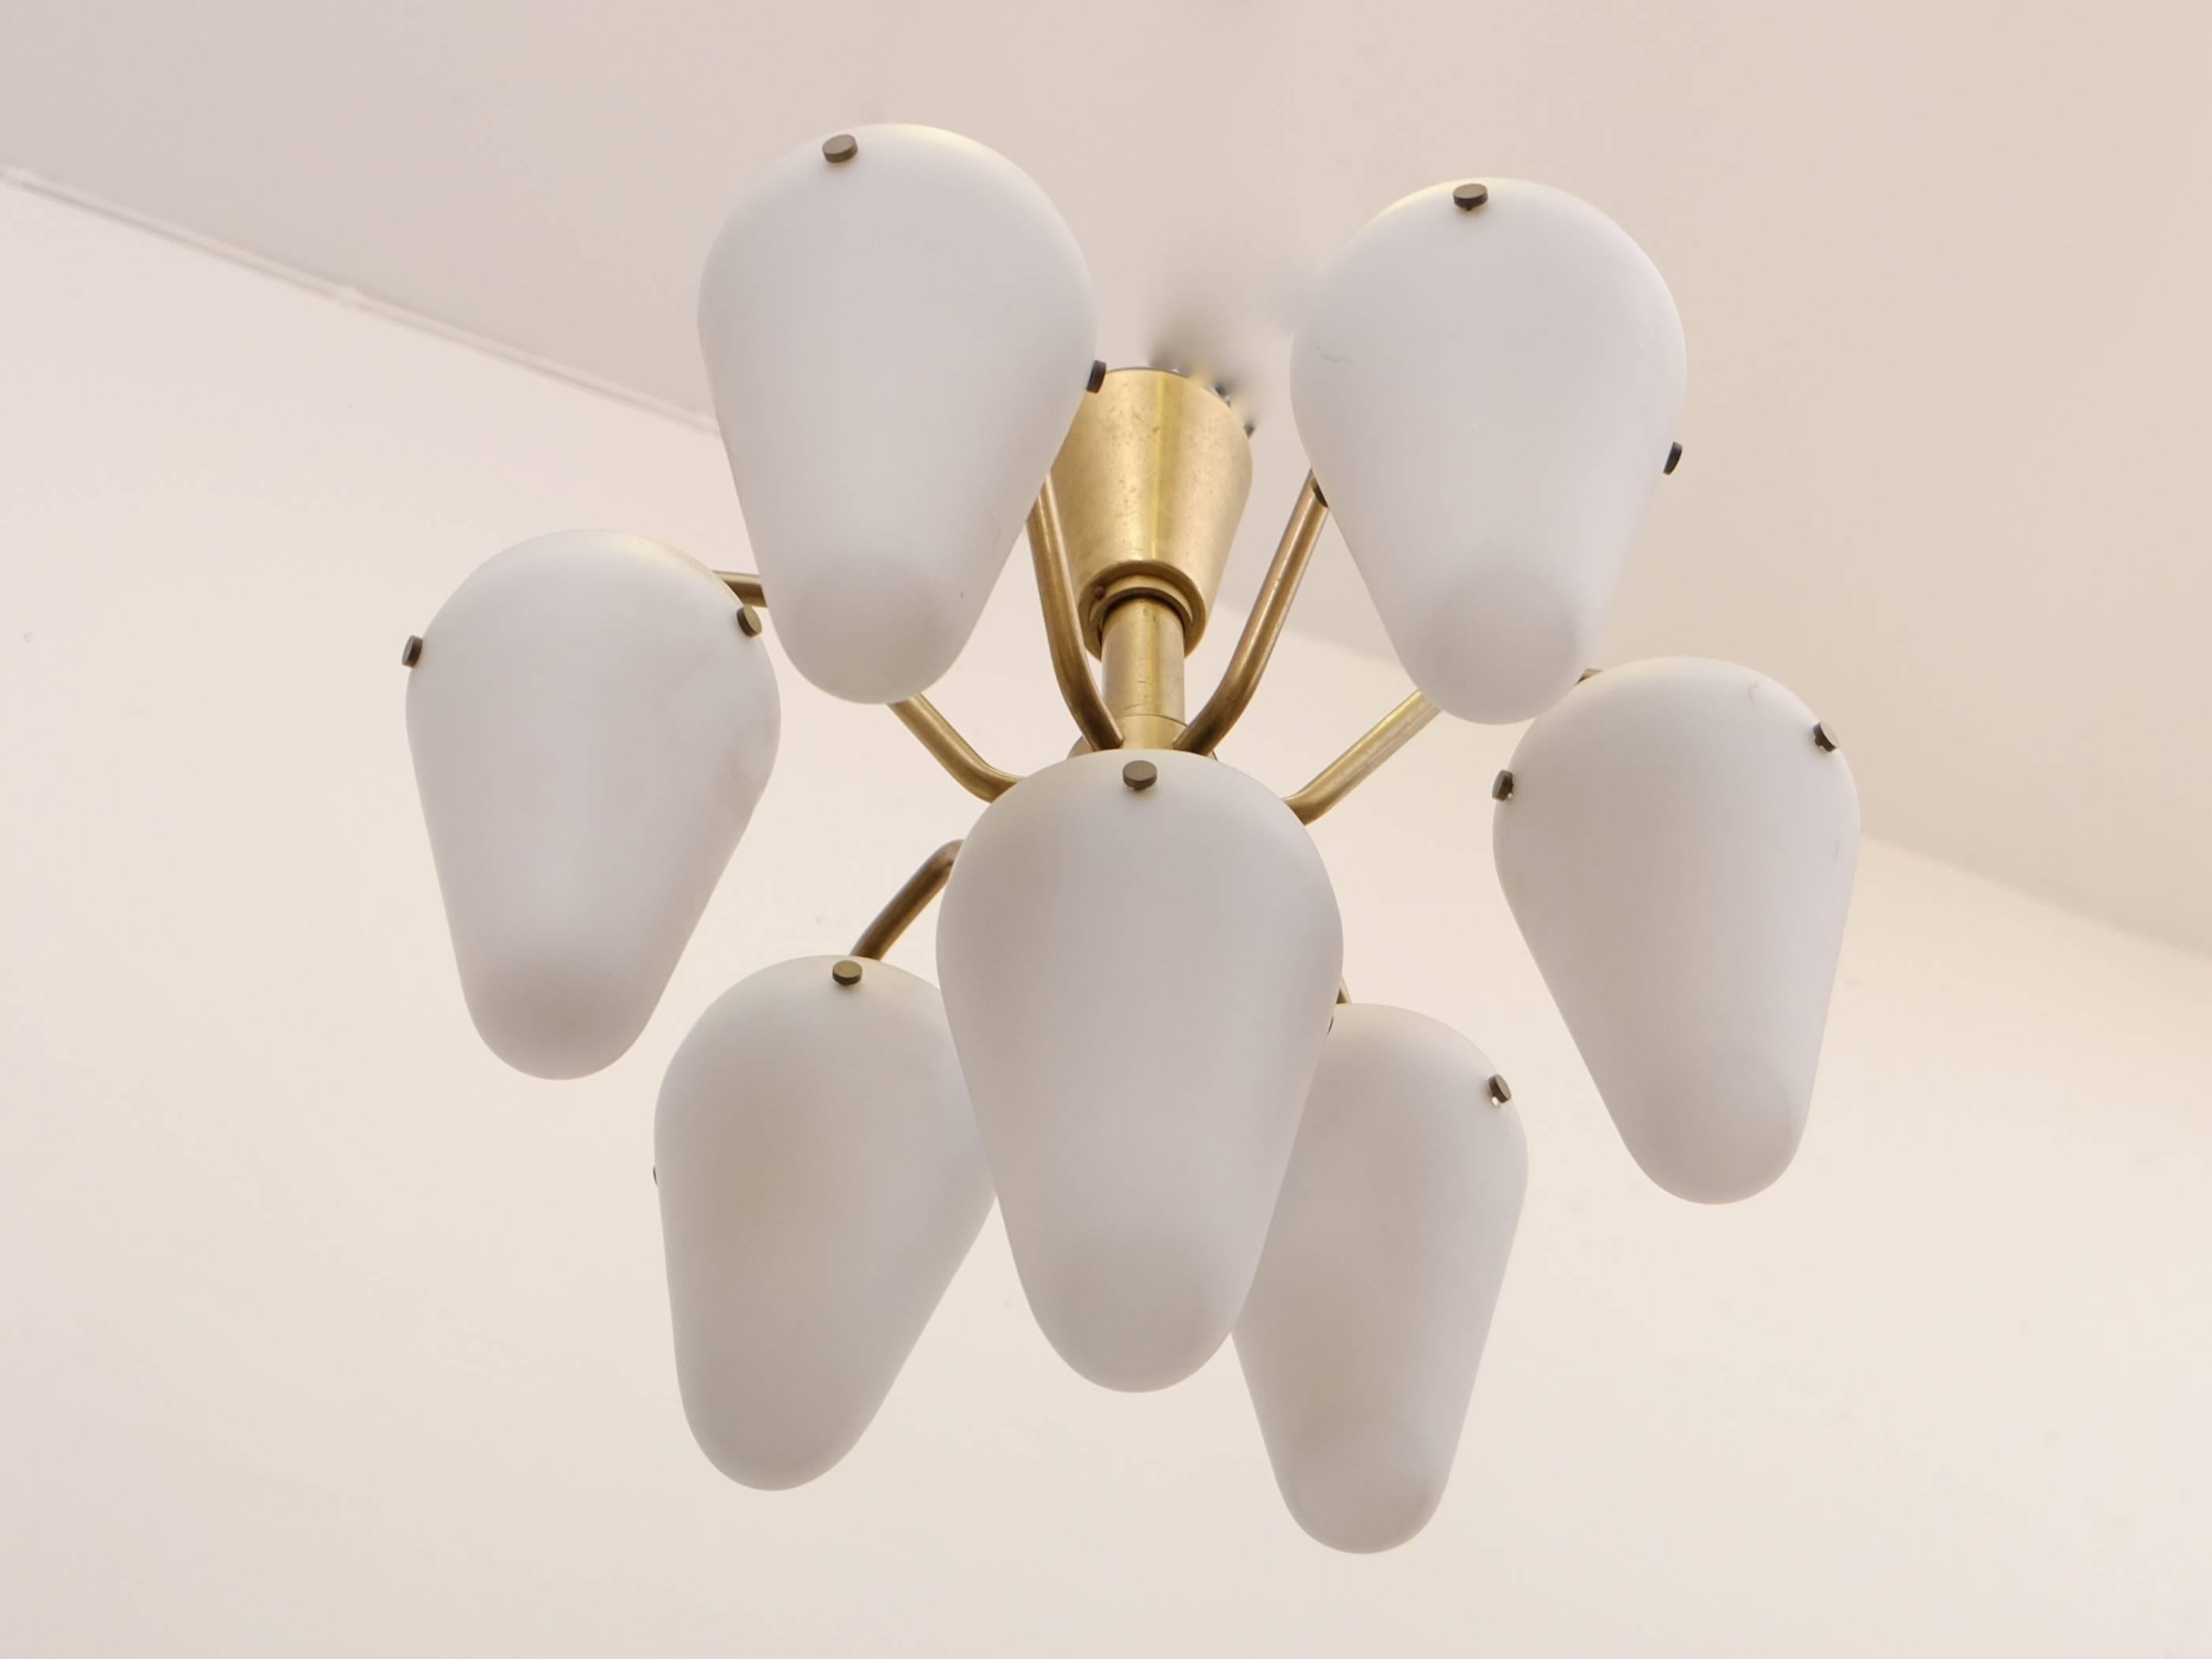 Rare and early seven-armed chandelier in brass and opaline glass. Produced by Hans-Agne Jakobsson AB in Markaryd, Sweden, late 1950s.